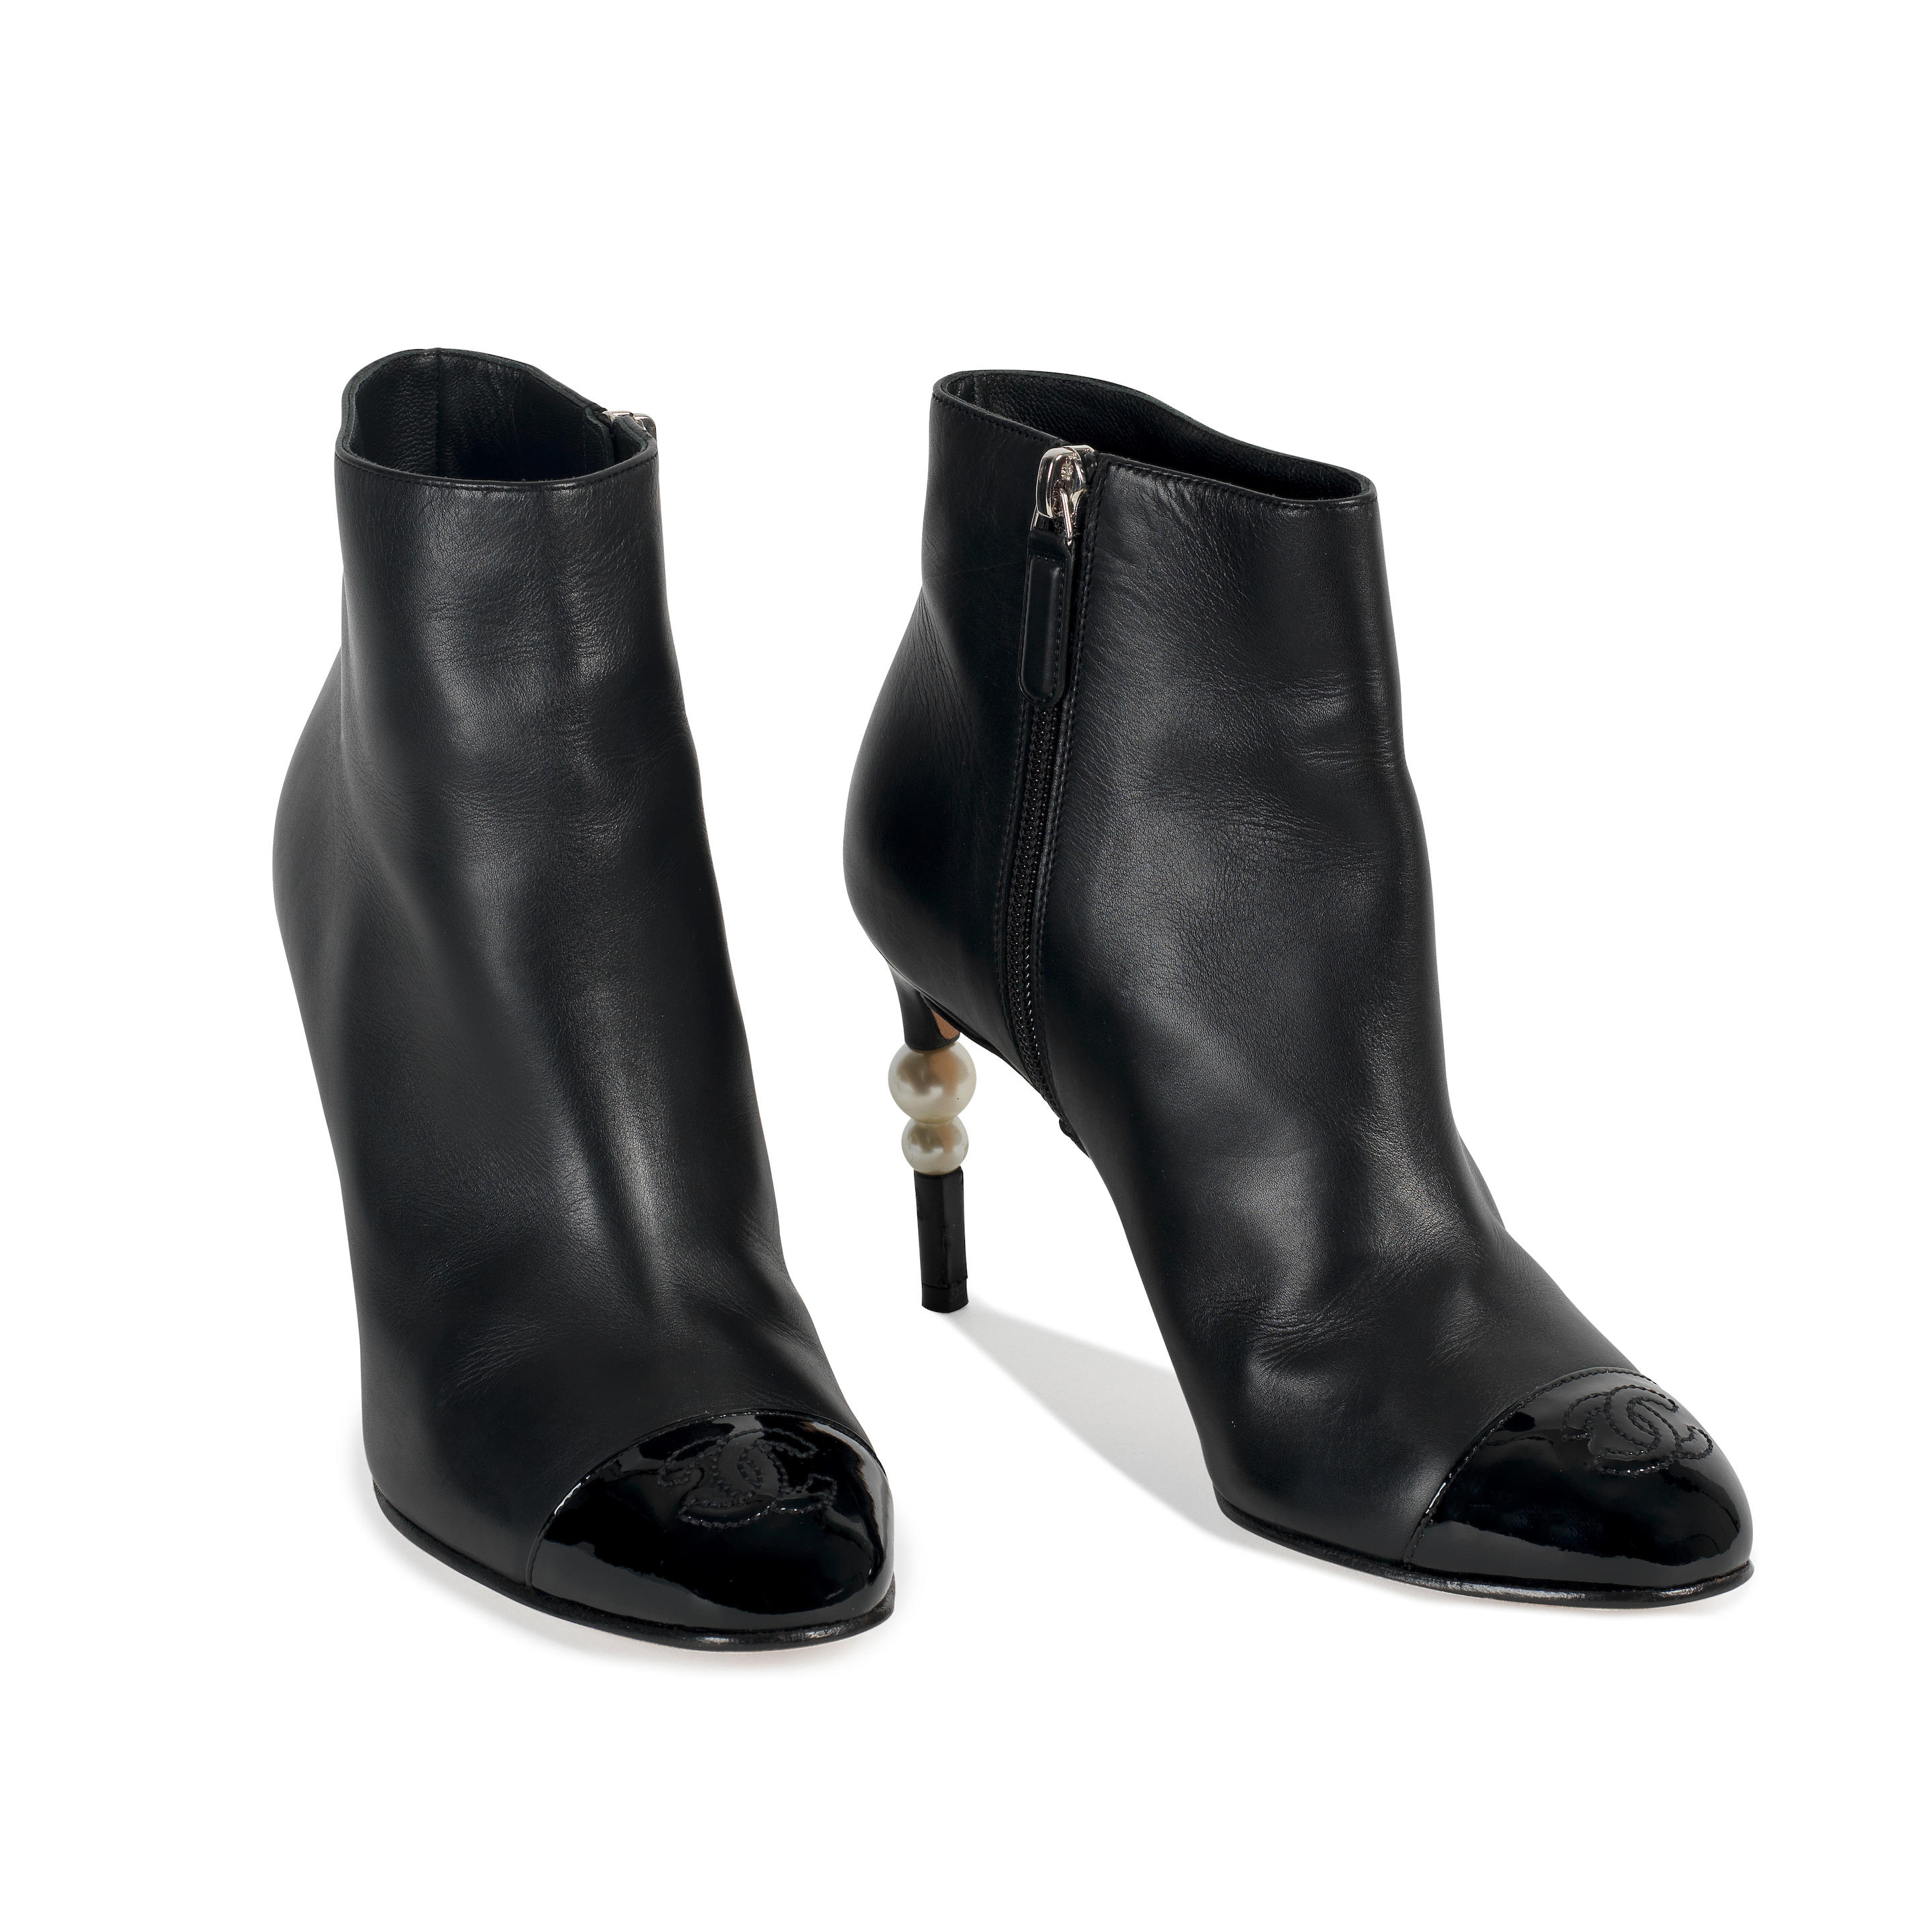 Bonhams : Virginie Viard for Chanel a Pair of Black Patent and Lambskin CC  Pearl Boots 2020 (includes dust bag)